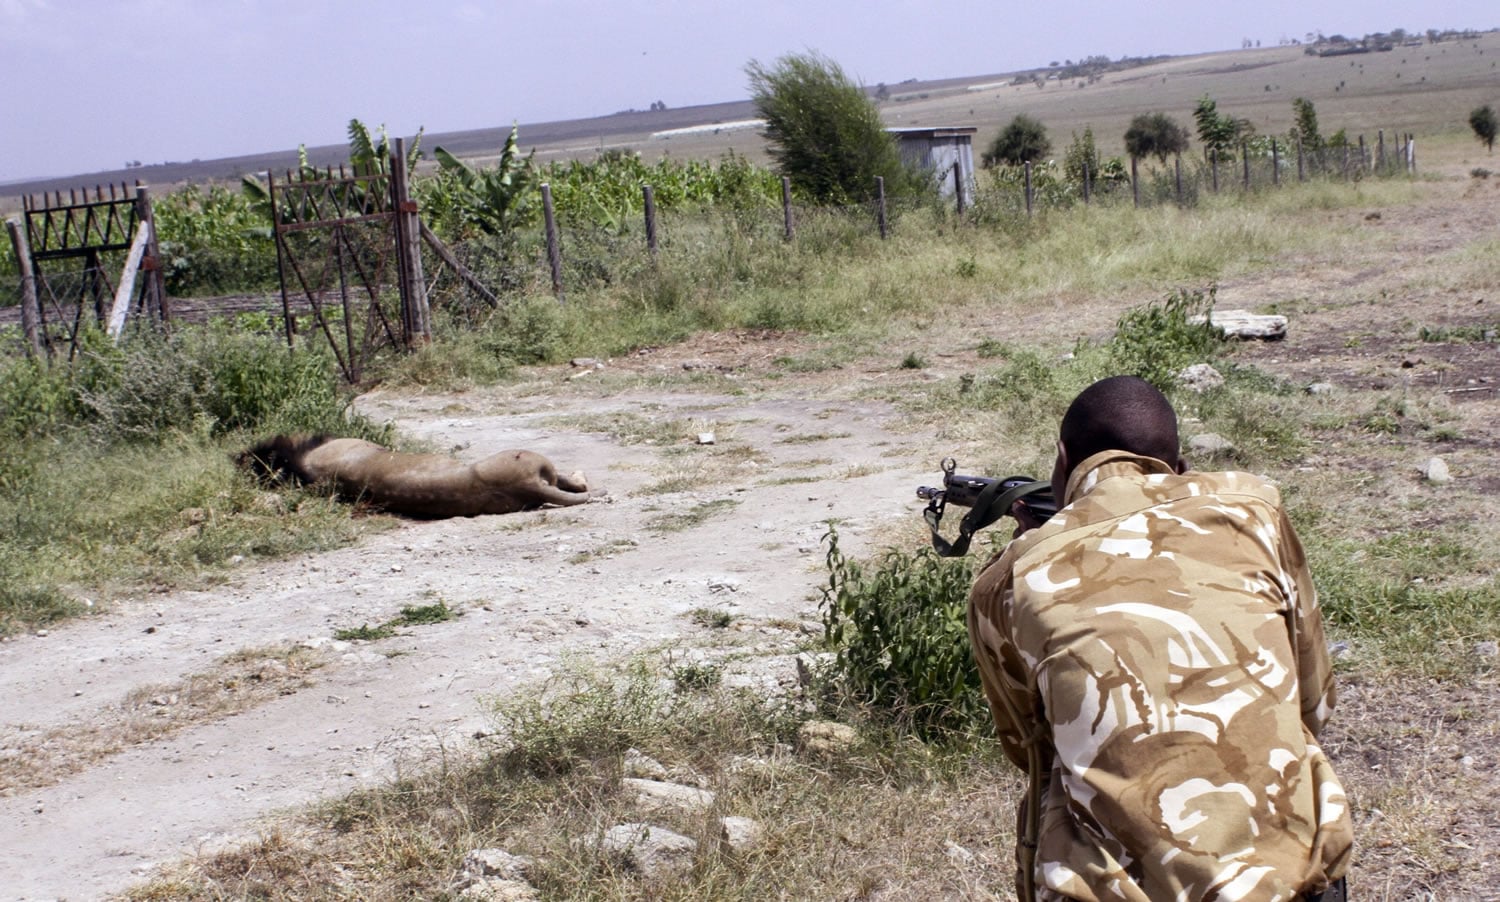 A ranger from the Kenya Wildlife Service shoots dead a male lion that had strayed from the Nairobi National Park, in Kajiado, Kenya, on Wednesday.